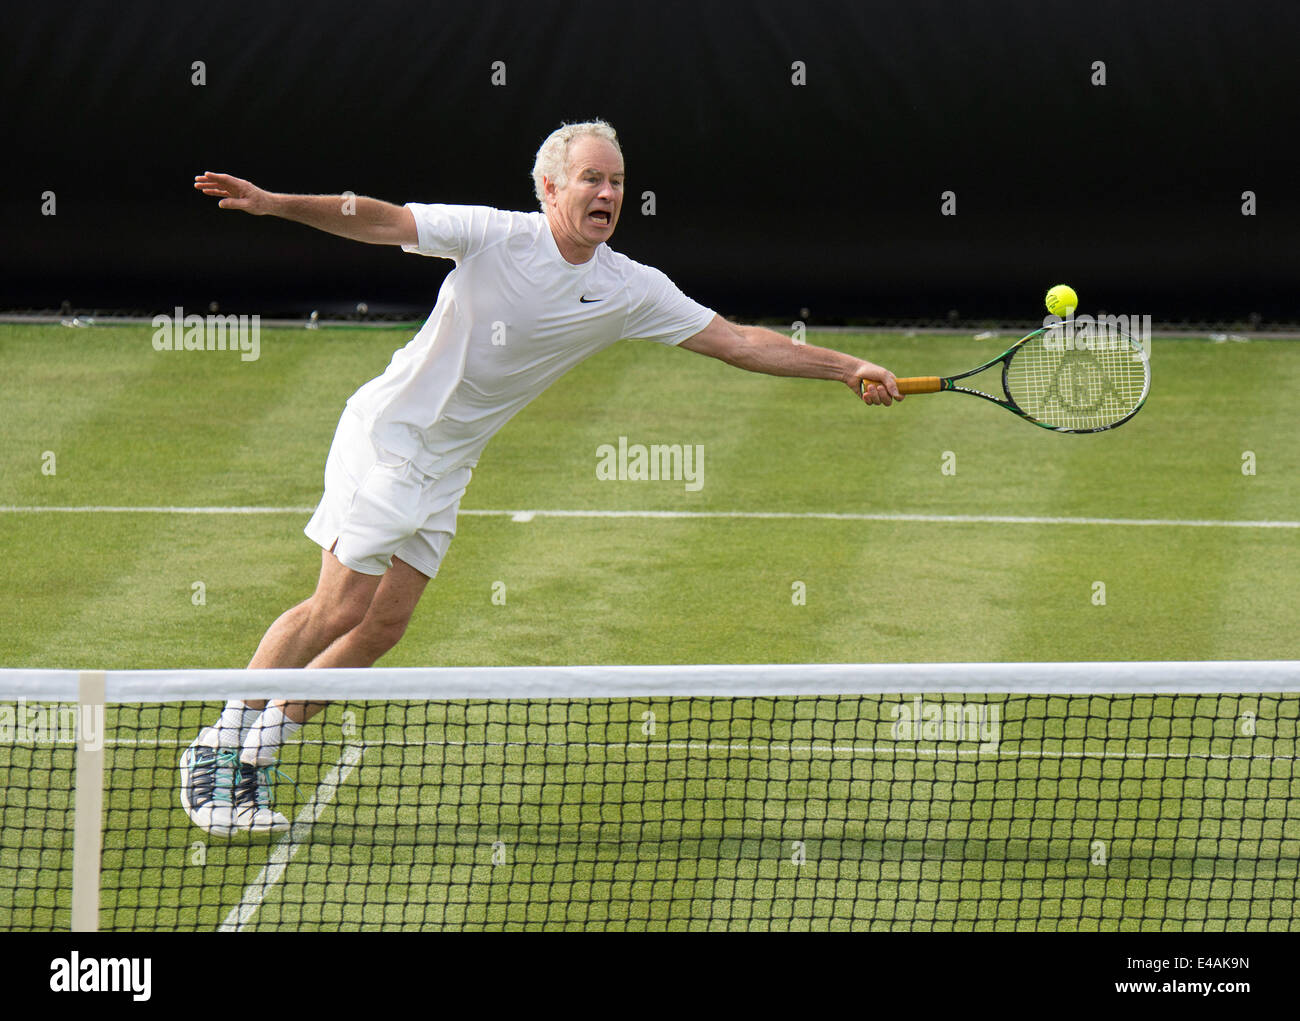 Stuttgart, Germany. 07th July, 2014. US tennis player John McEnroe in action against Stich from Germany during the first time a match of the Mercedes Cup Tennis was played on grass in Stuttgart, Germany, 07 July 2014. The ATP tpurnament will be played on grass instead of clay from 2015. Photo: DANIEL MAURER/DPA/Alamy Live News Stock Photo